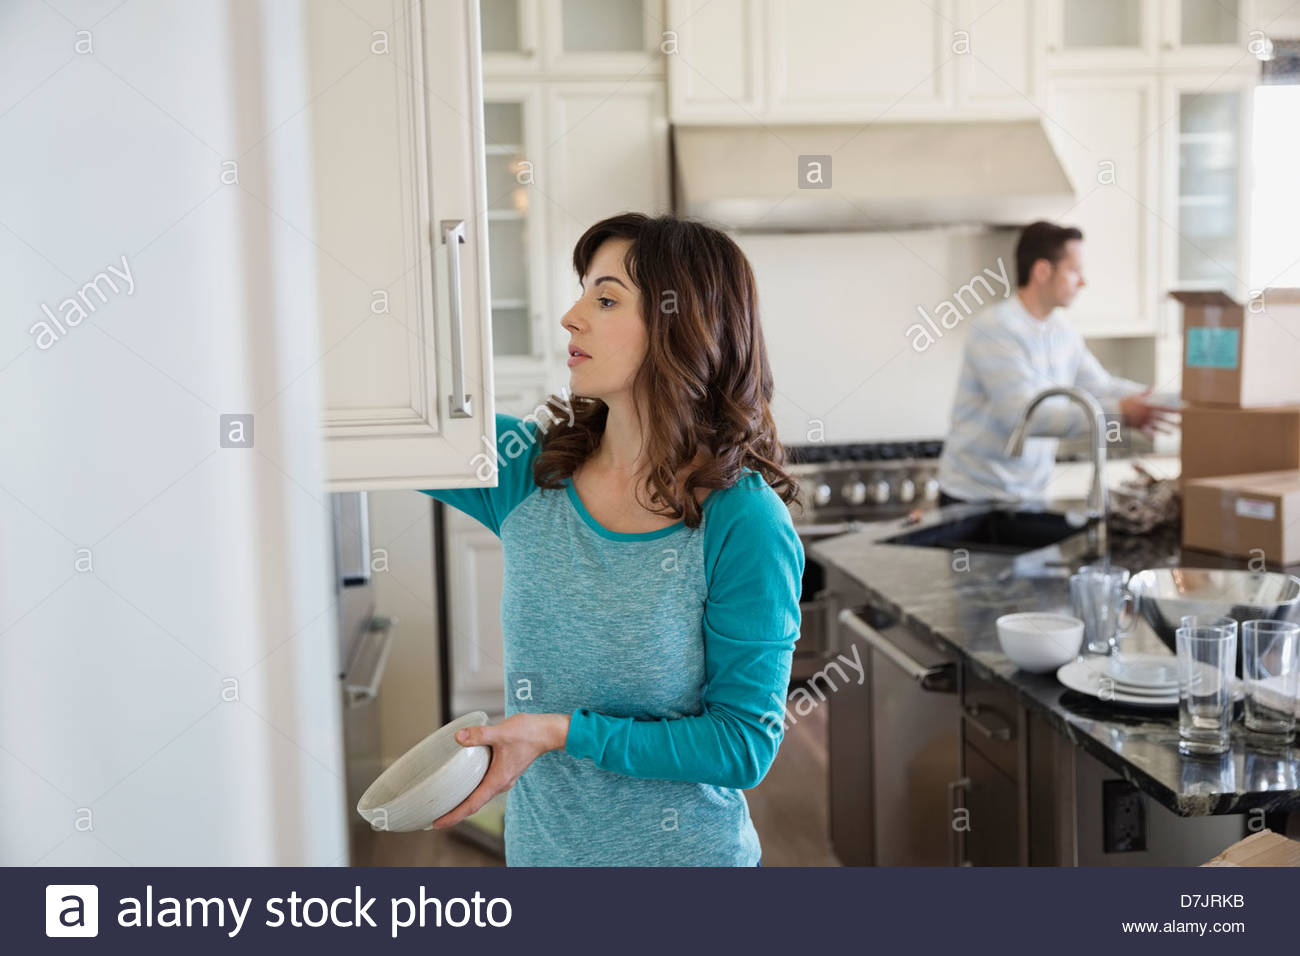 Couple putting away dishes in new home Stock Photo